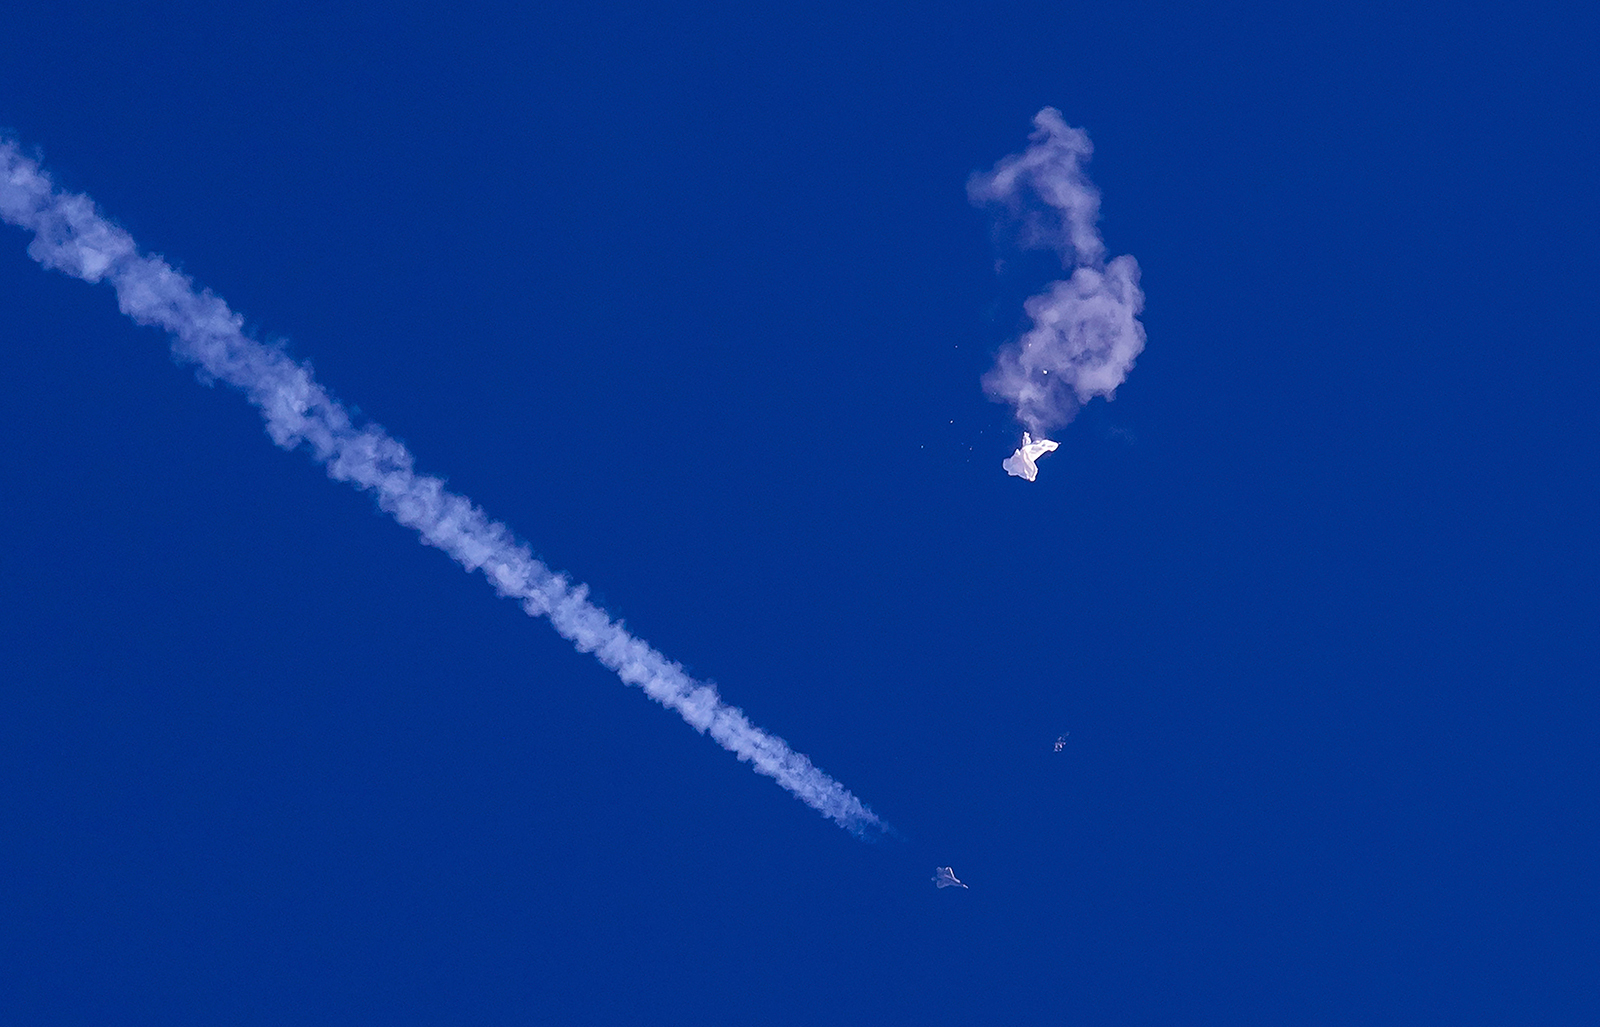 In this photo provided by Chad Fish, the remnants of a large balloon drift above the Atlantic Ocean, just off the coast of South Carolina, with a fighter jet and its contrail seen below it, on February 4.